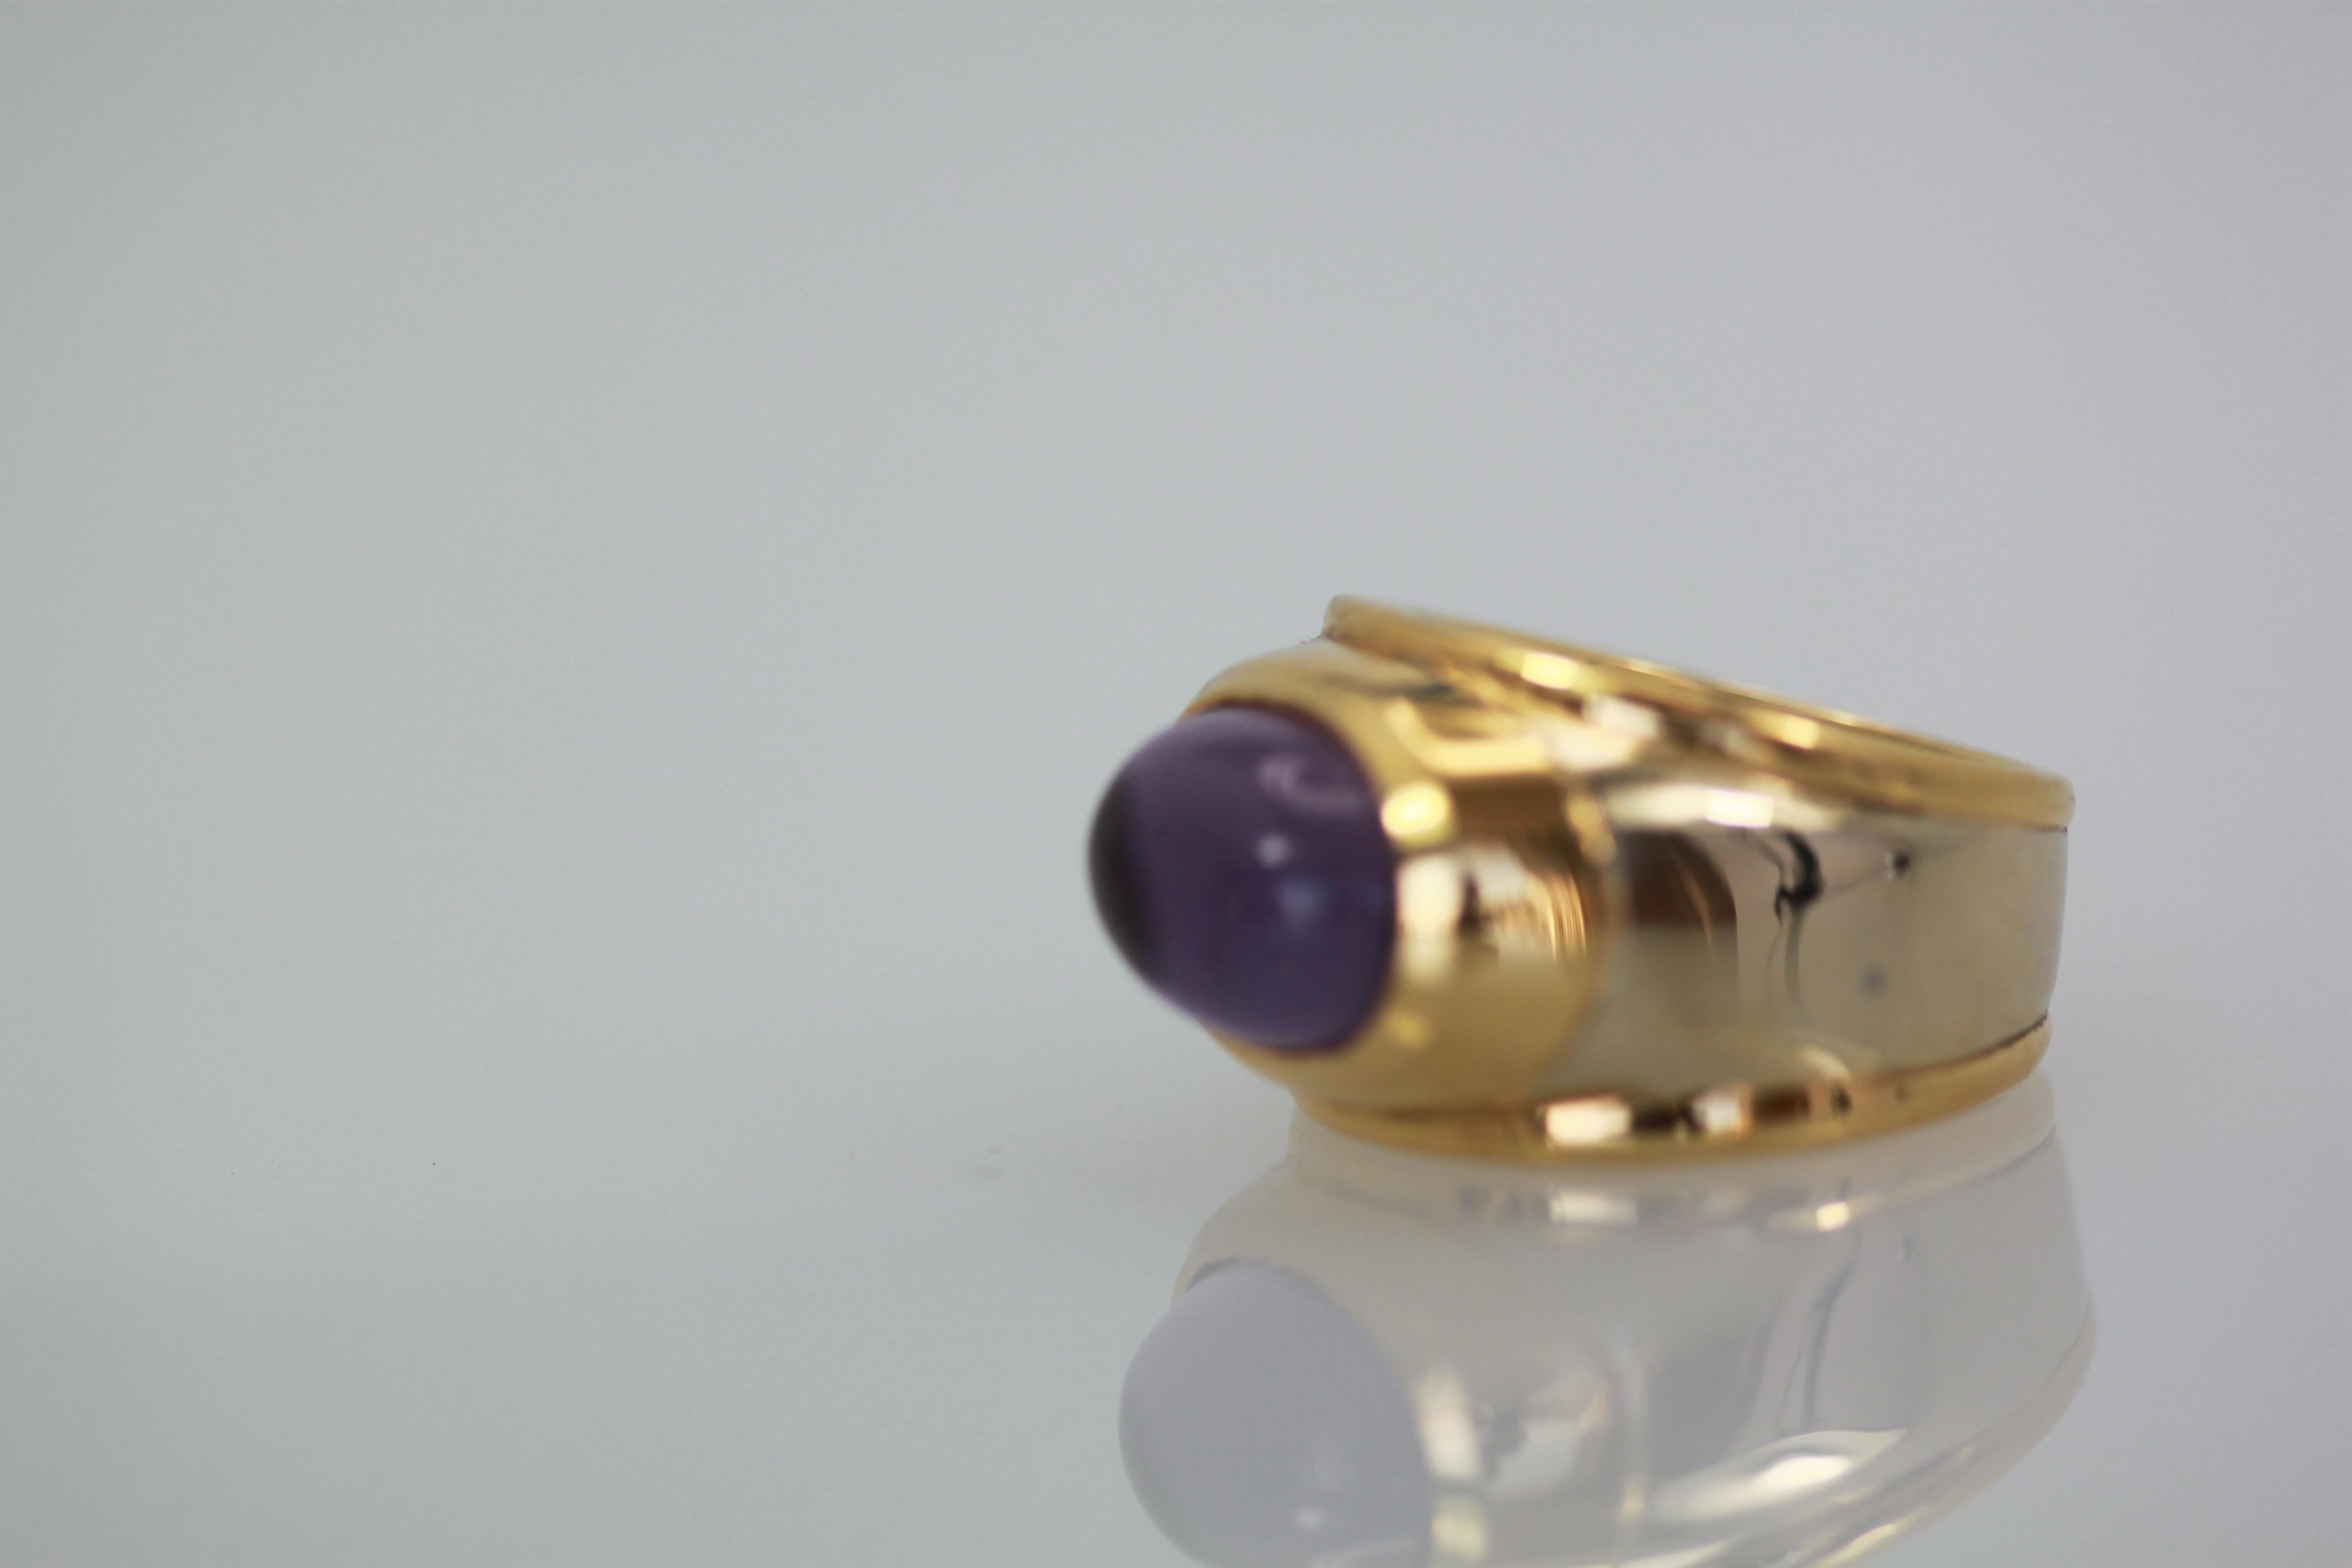 This Marina B. ring is made in 18K Yellow Gold and White Gold, it's center is a large Amethyst Cabochon.
This ring is discontinued but is just lovely.